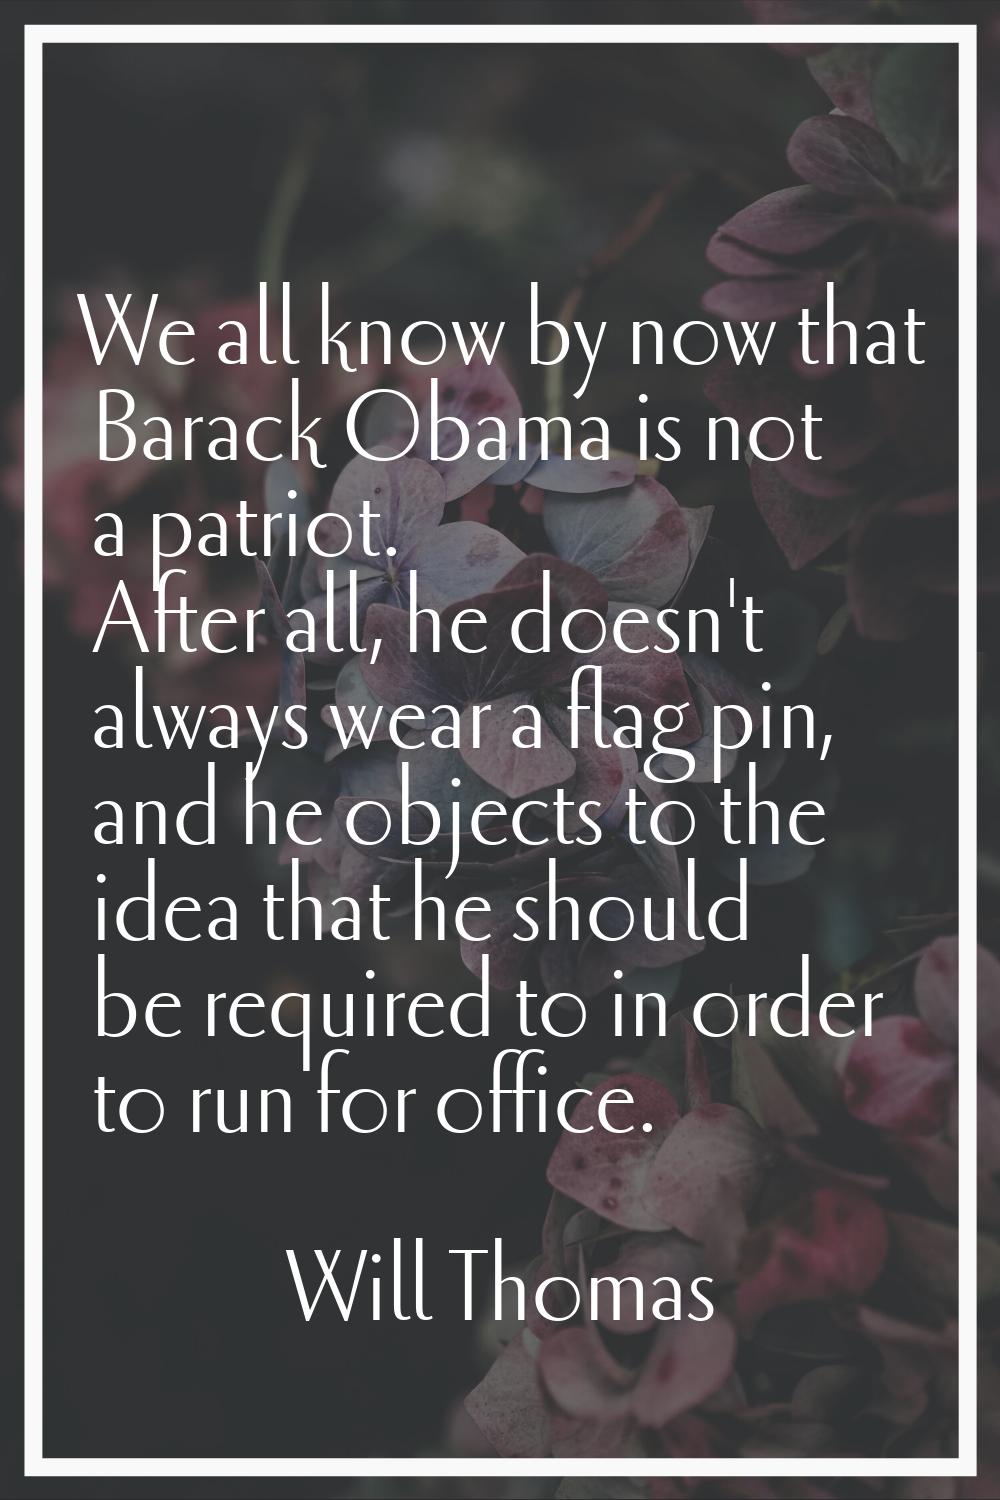 We all know by now that Barack Obama is not a patriot. After all, he doesn't always wear a flag pin